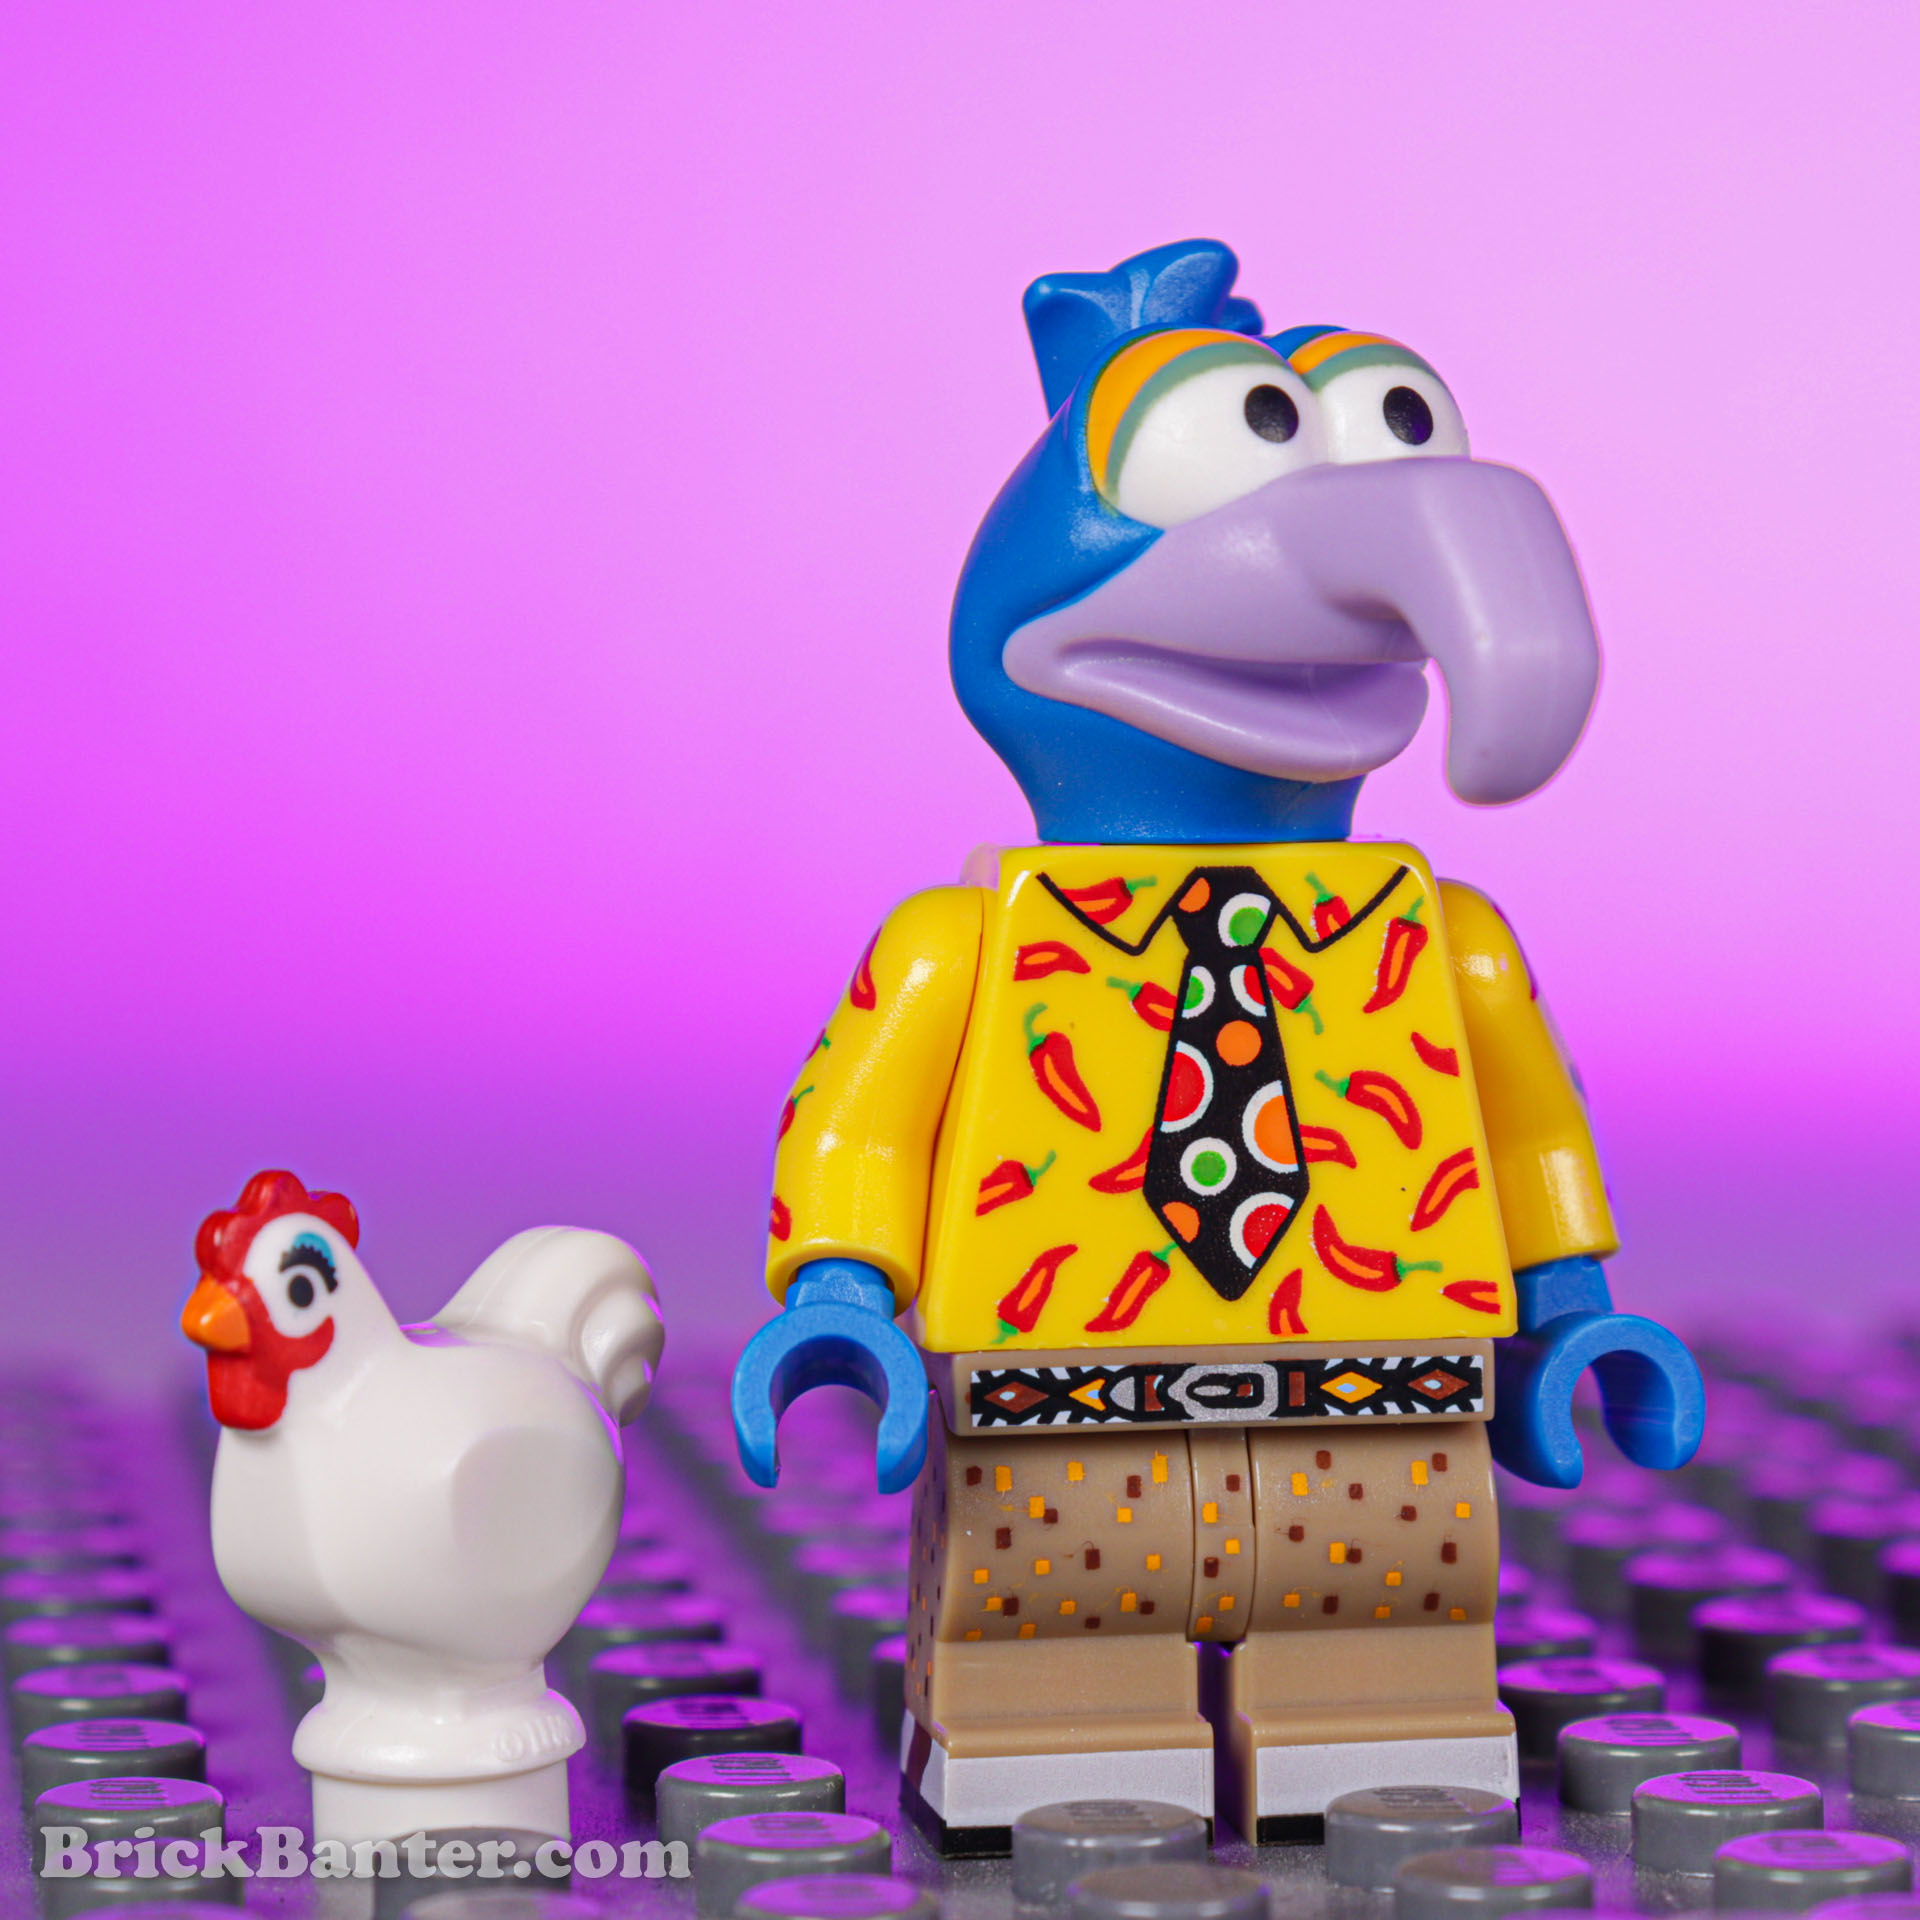 LEGO 71033 - The Muppets